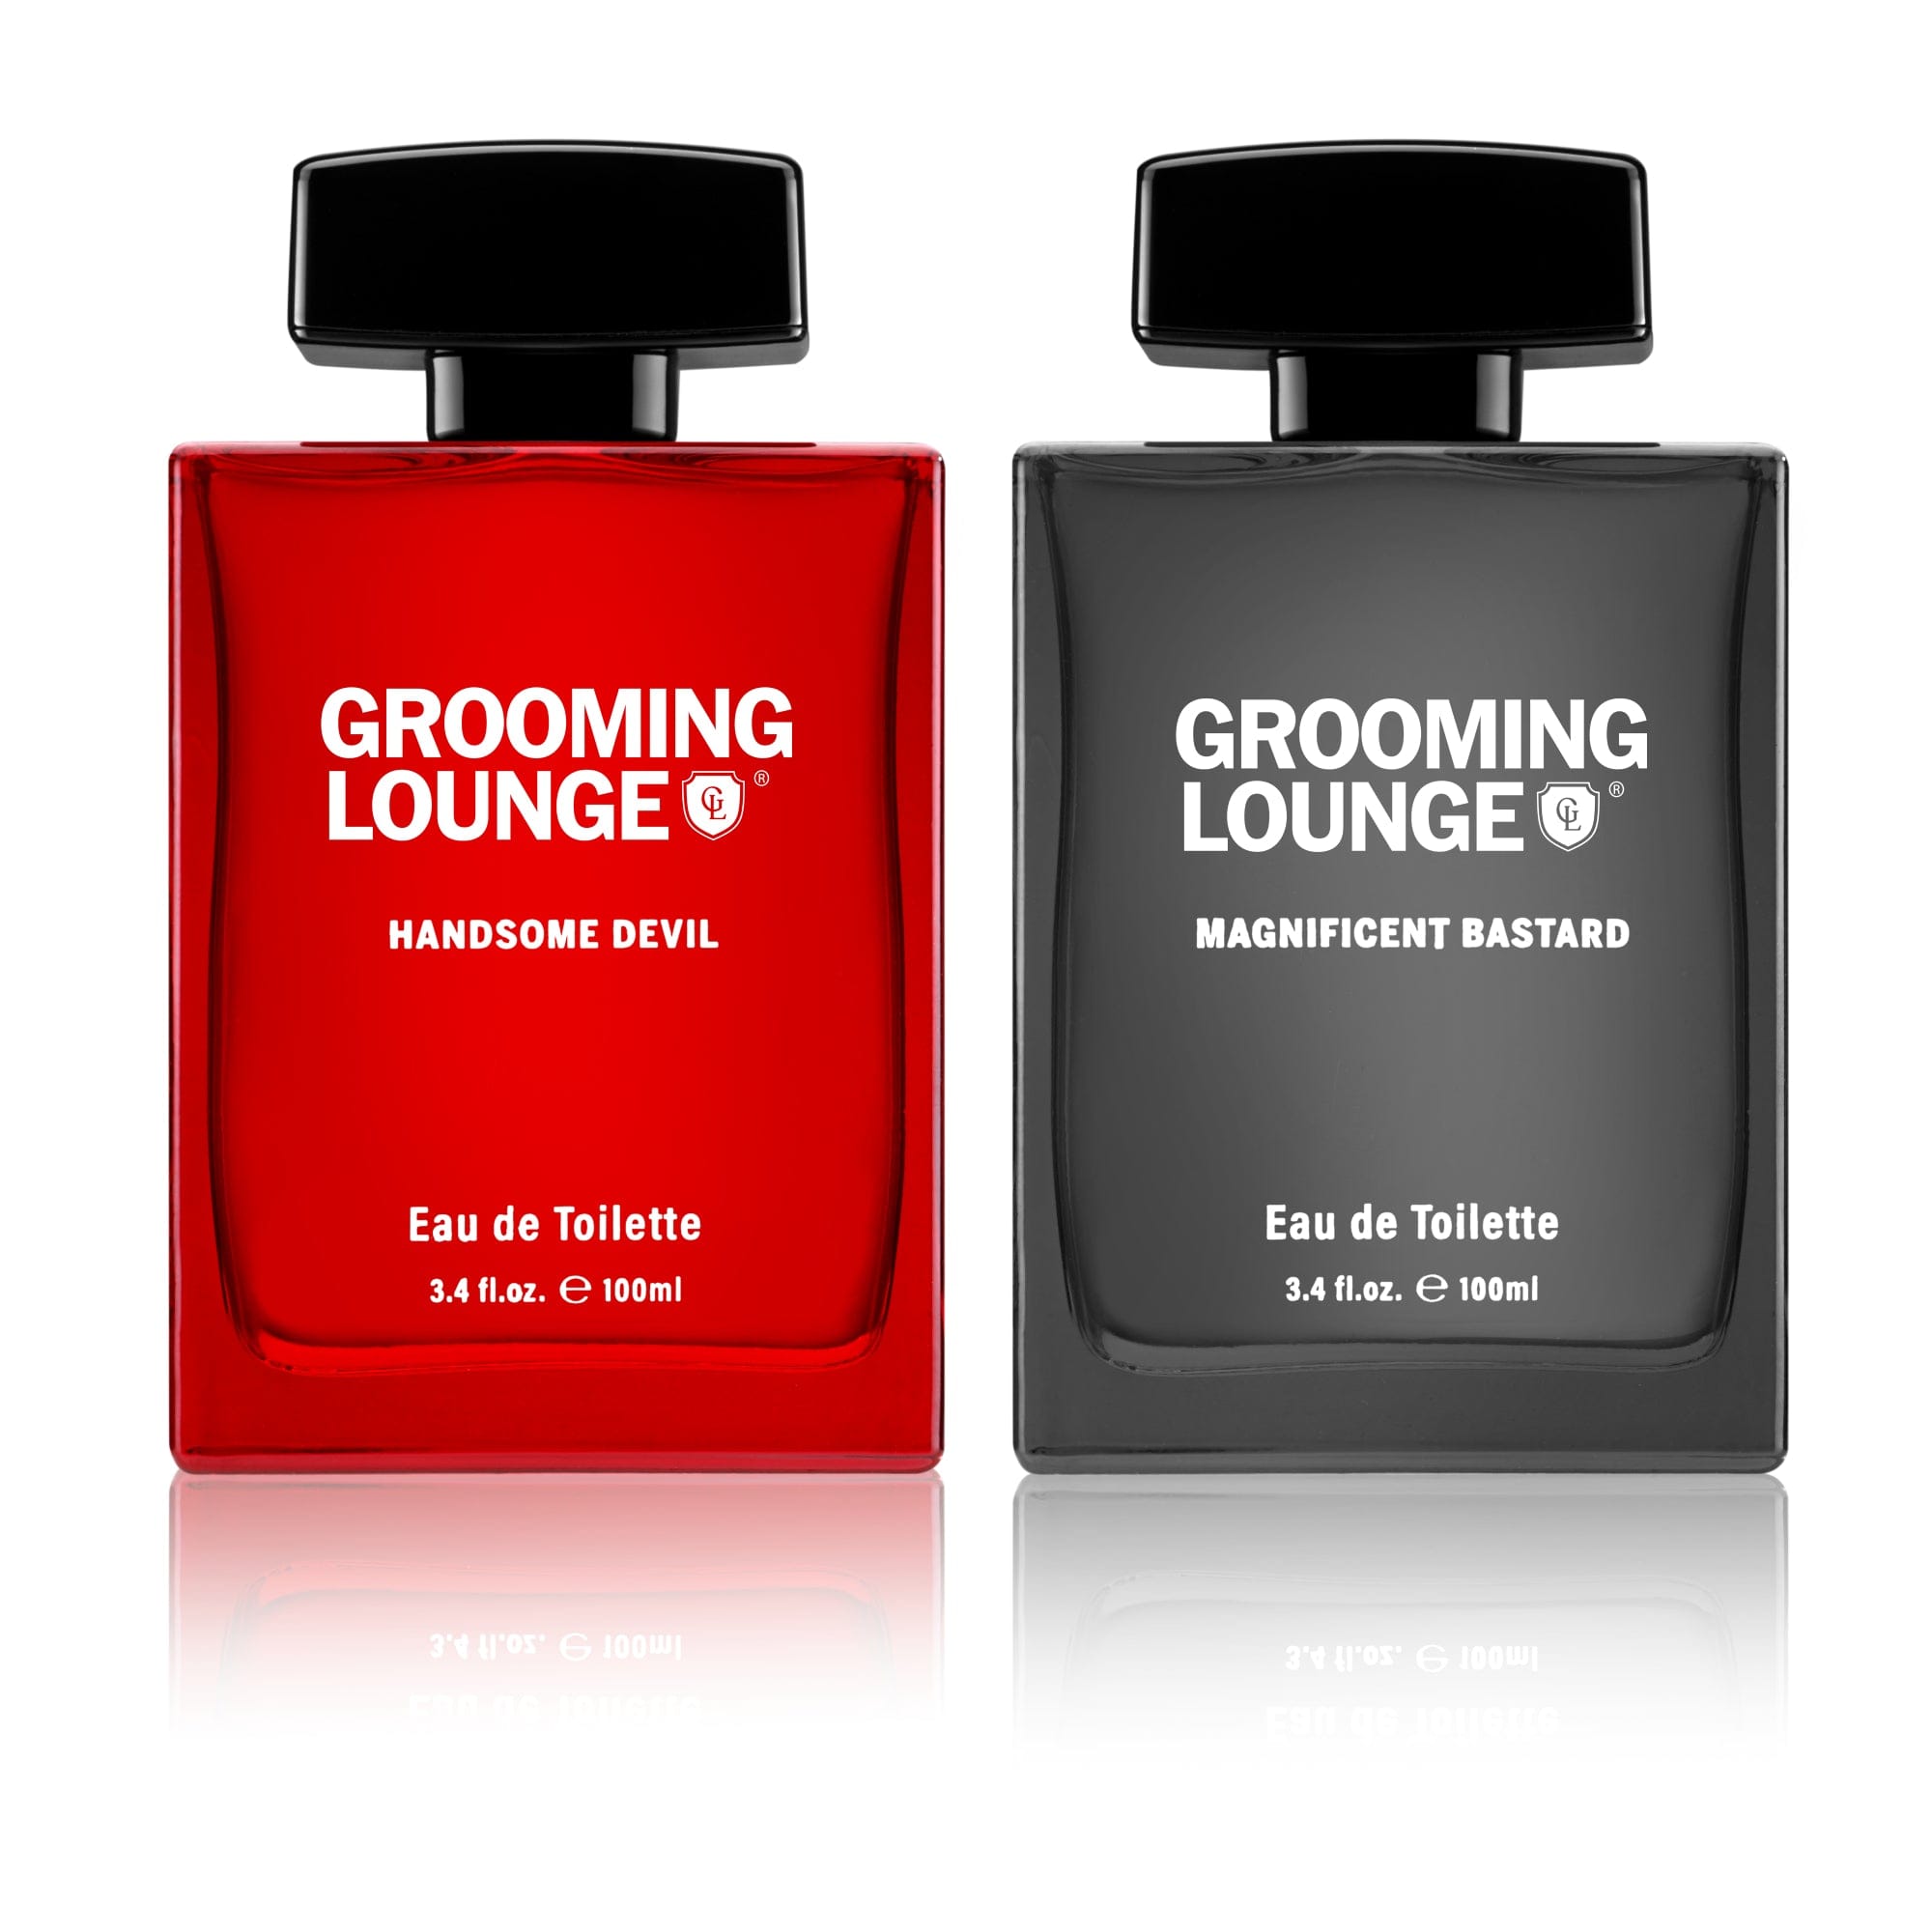 Grooming Lounge Fragrance Duo #1 ($150 Value)